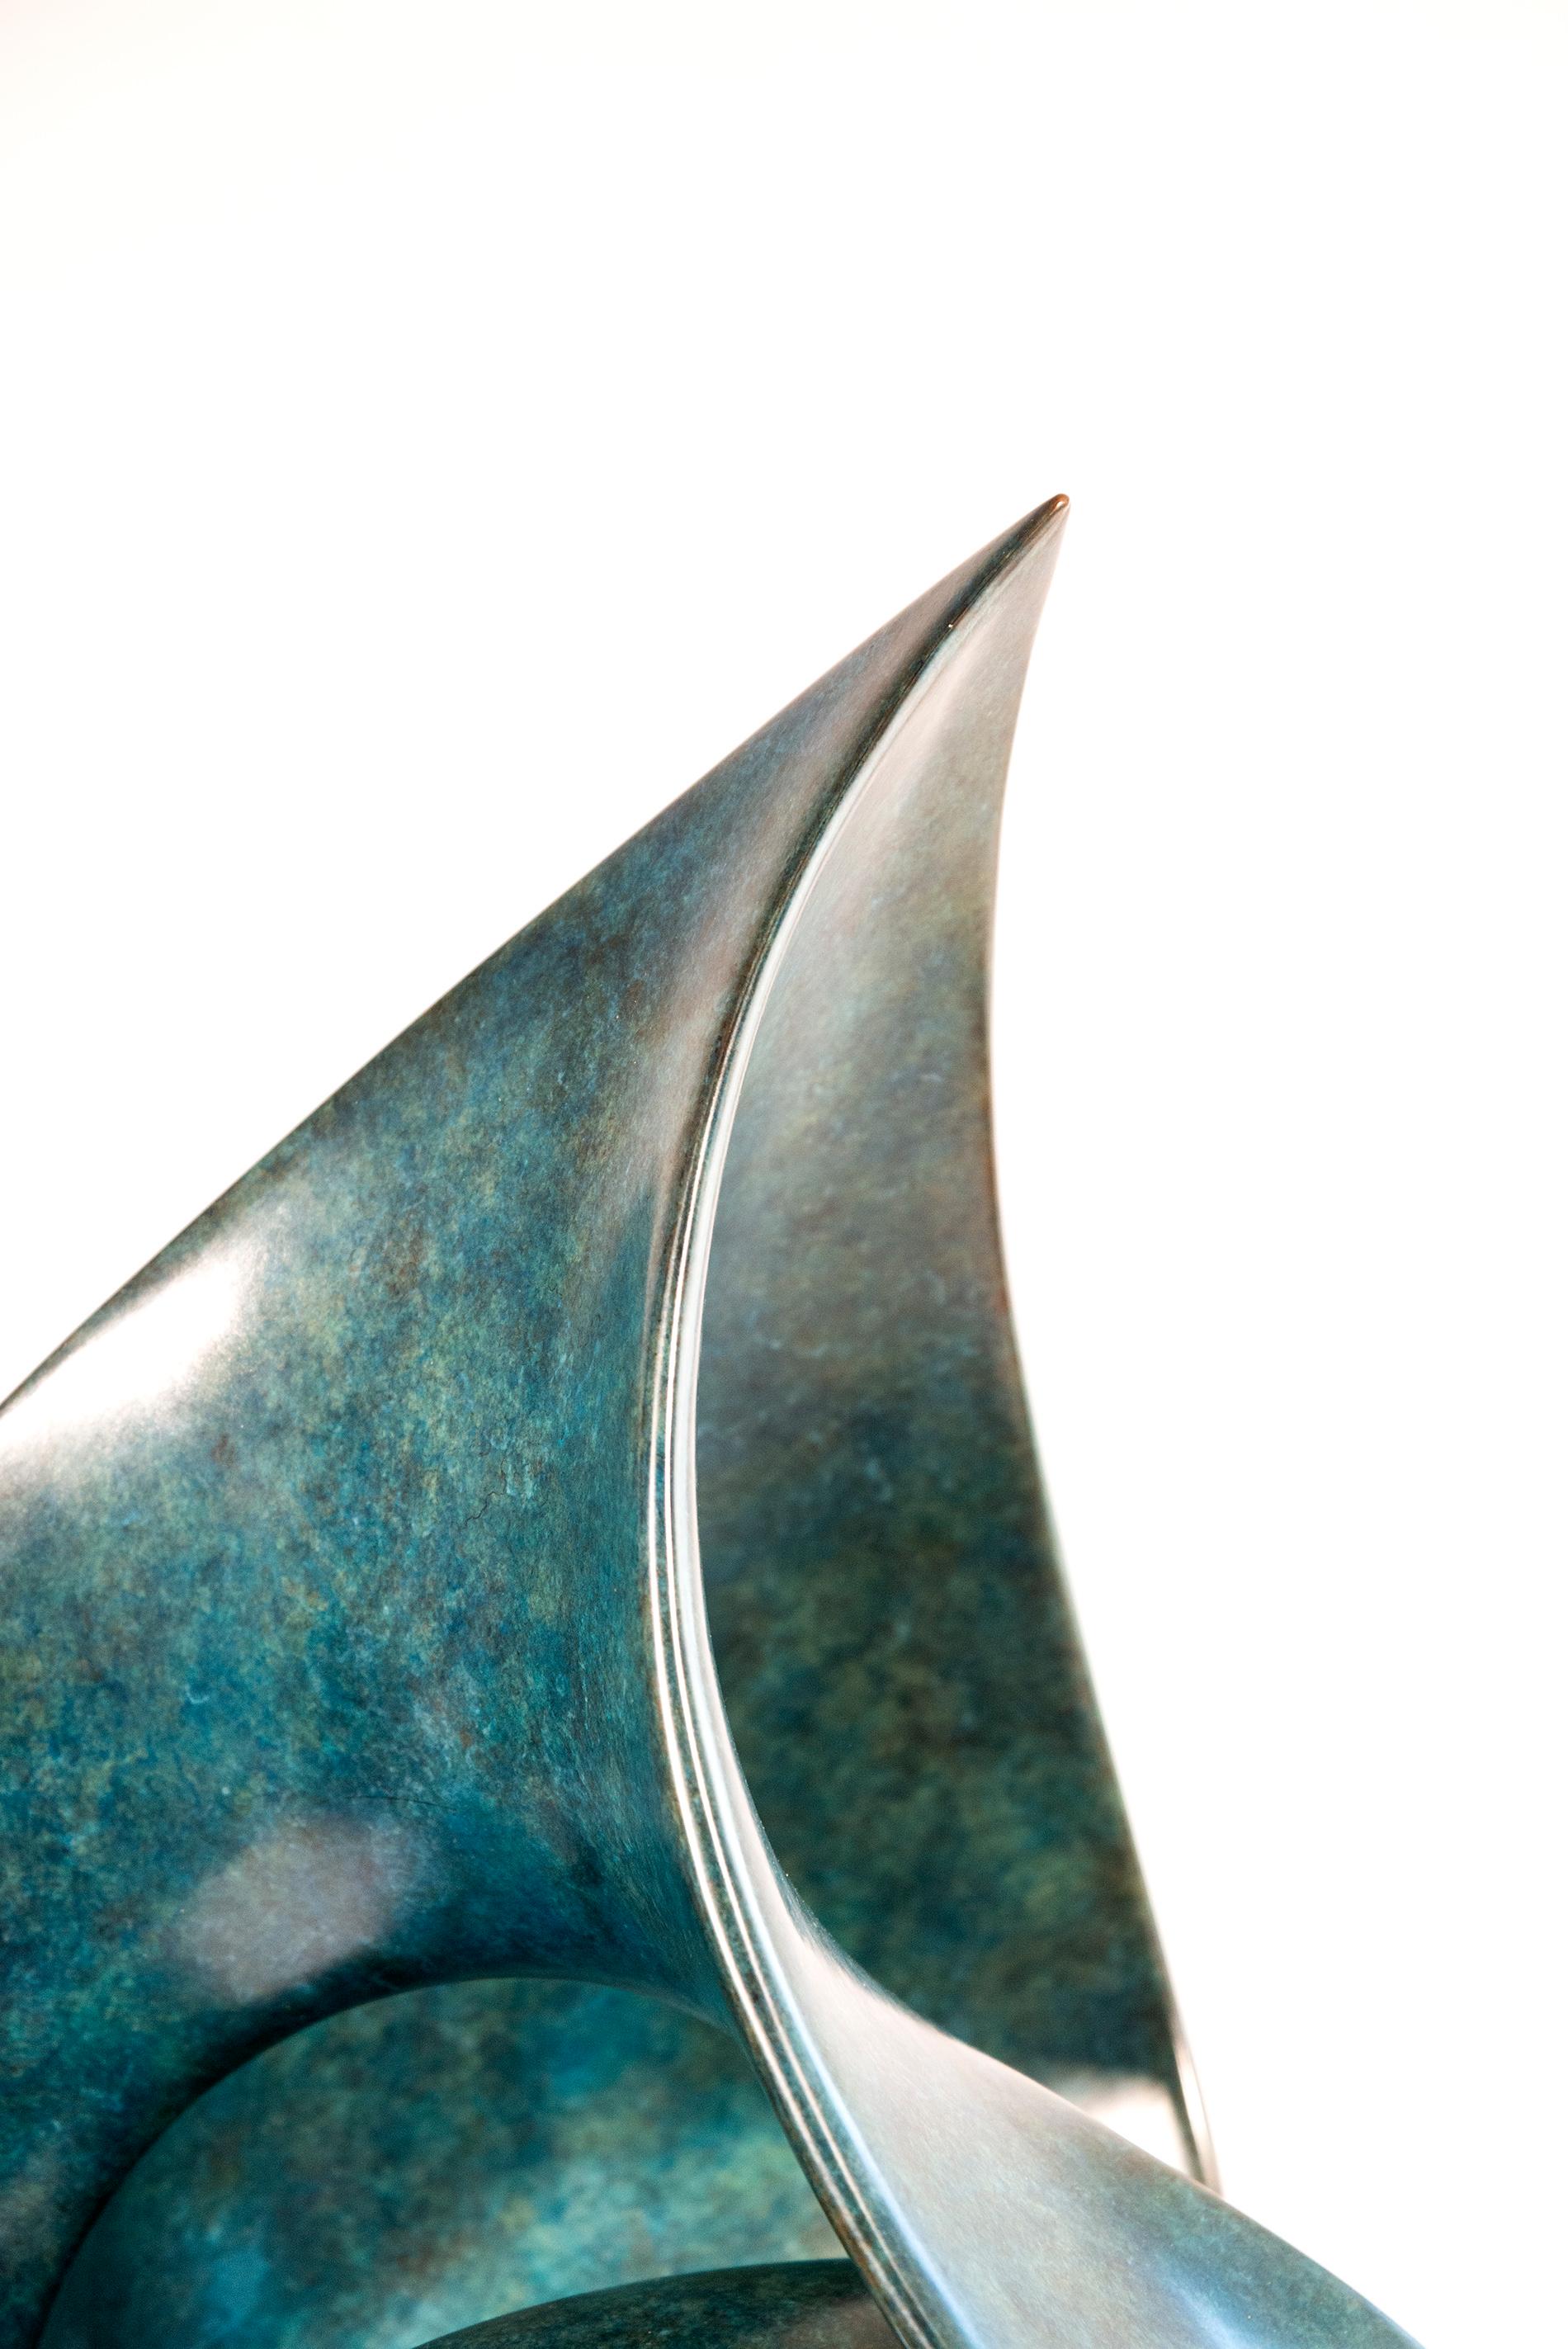 Eroica A.P. 1 - smooth, polished, abstract, contemporary, bronze sculpture For Sale 9